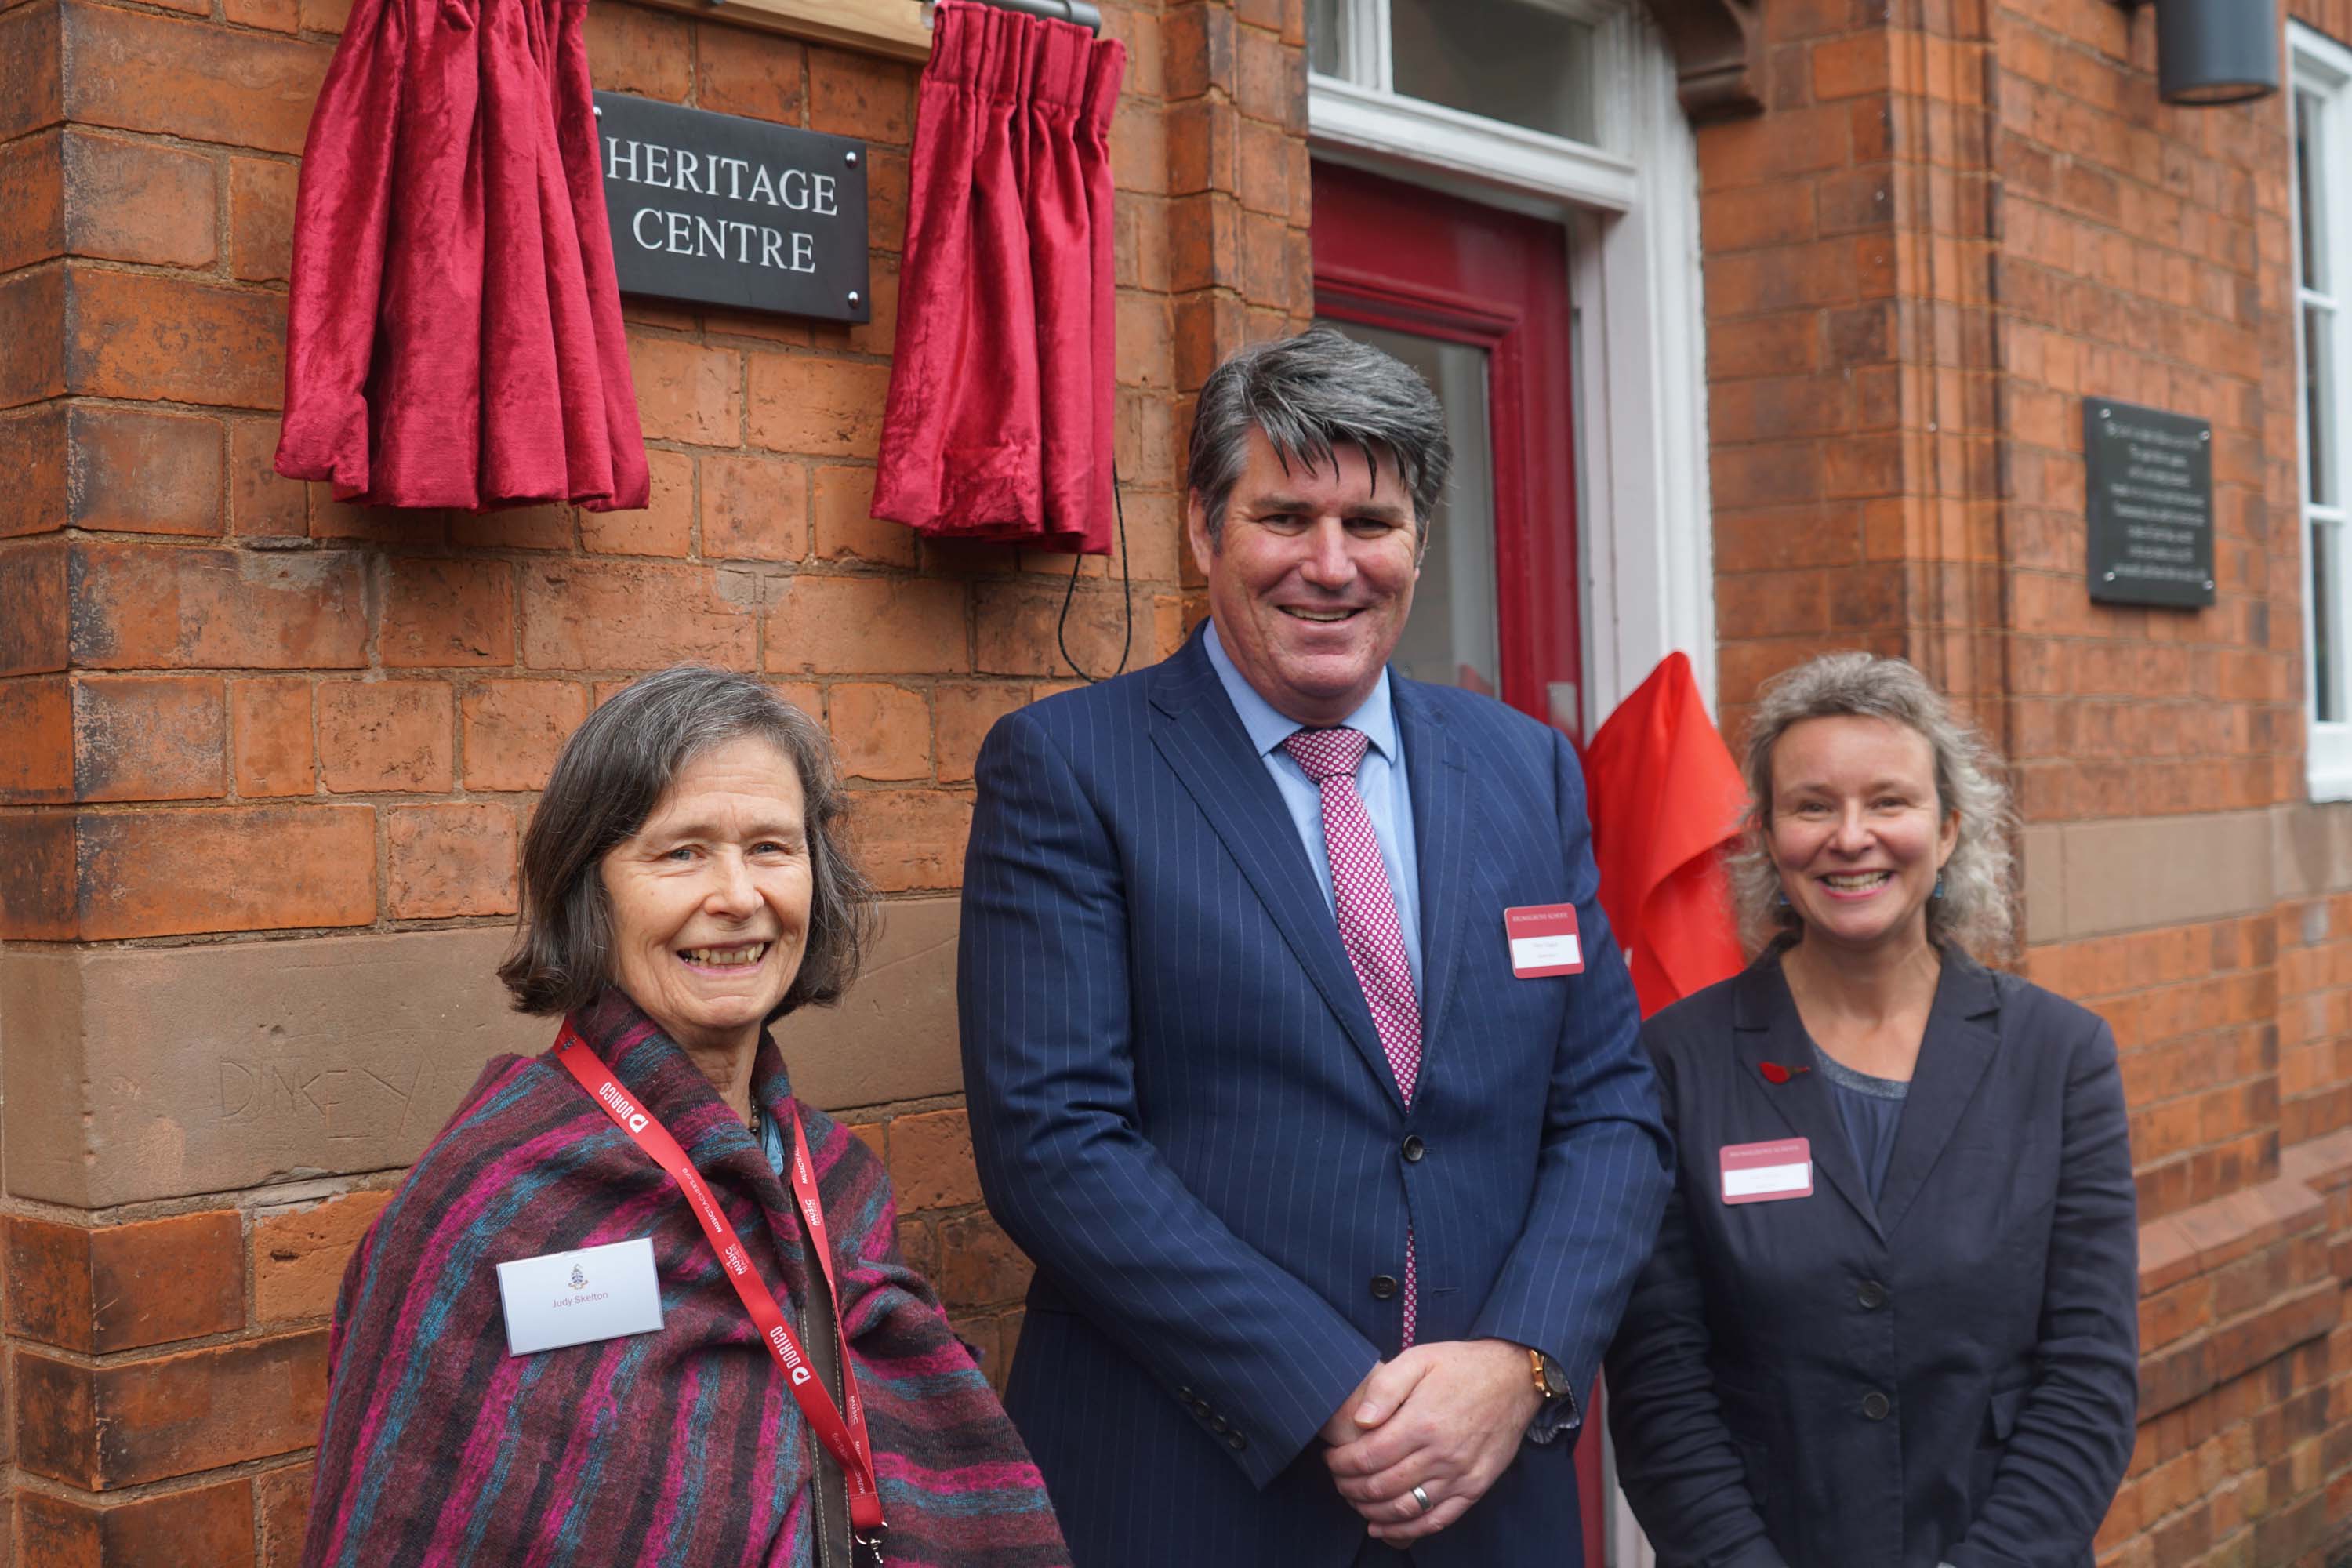 The Official Opening of the Heritage Centre - 30/09/2021